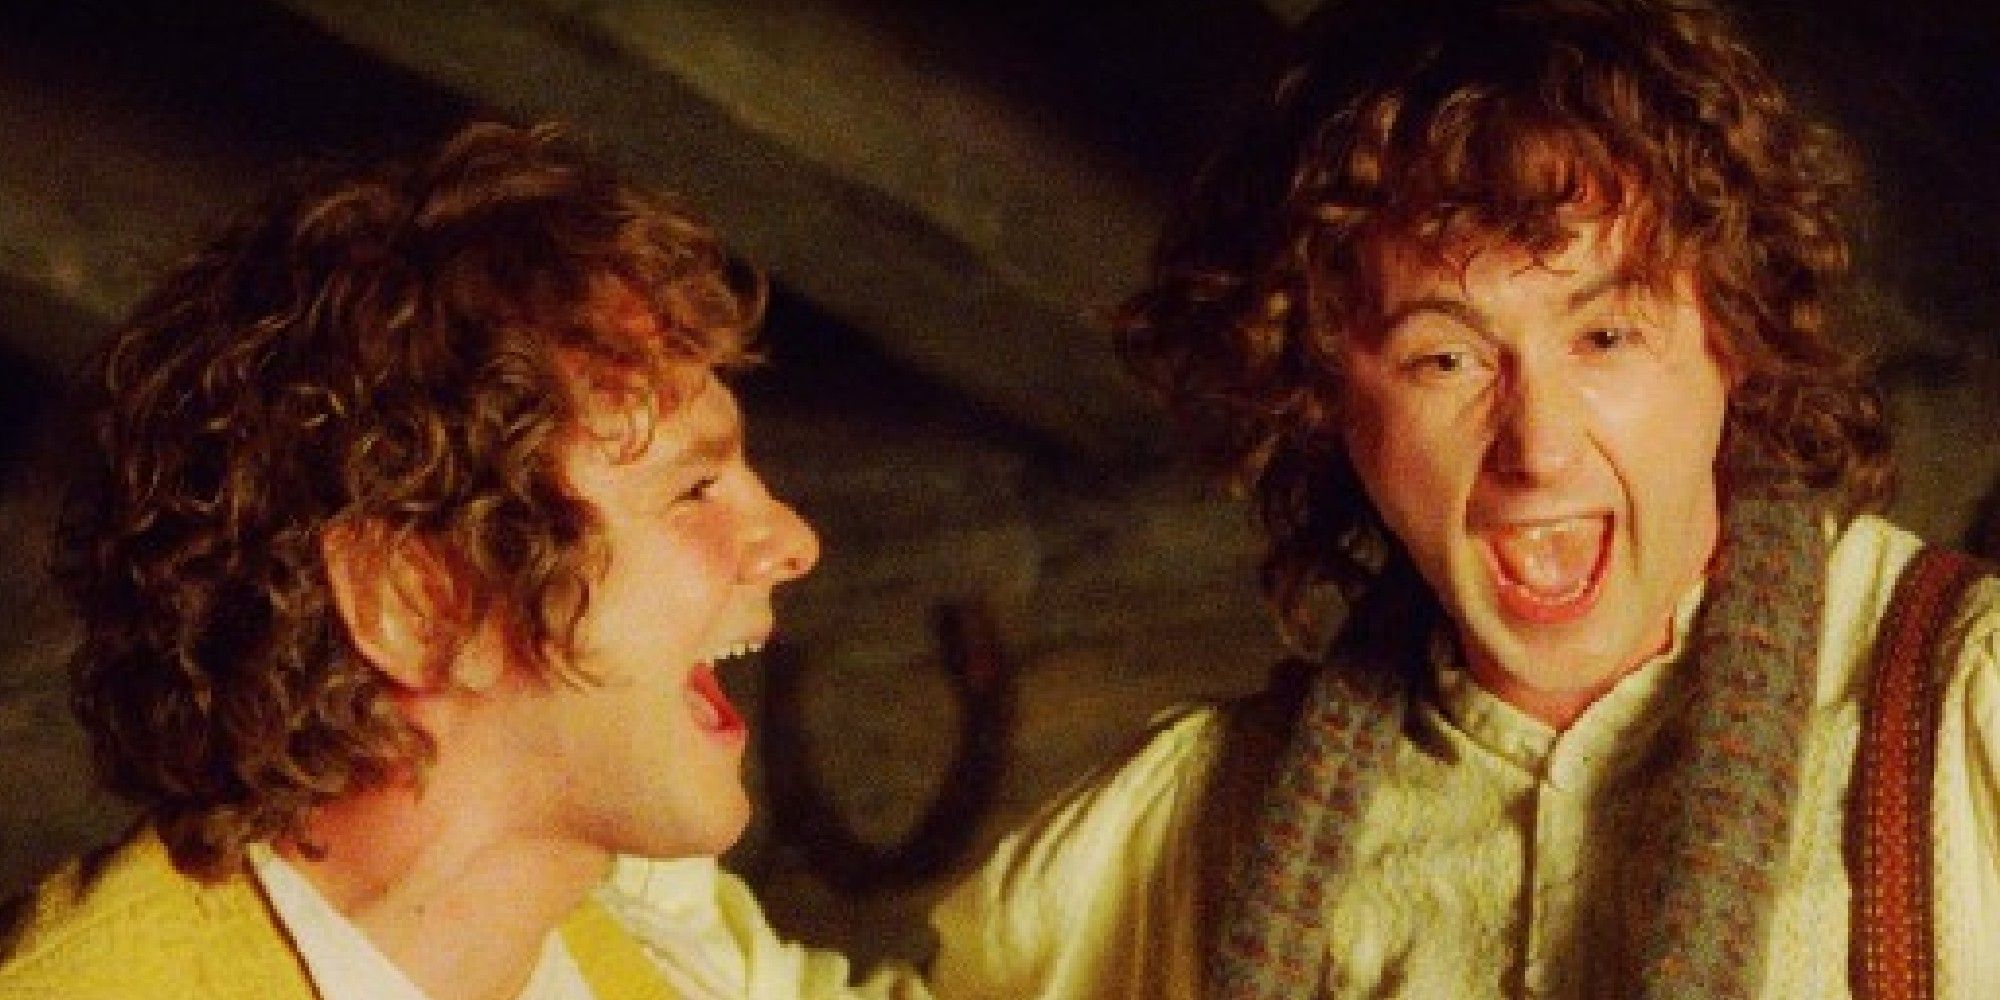 Lord of the Rings Billy Boyd as Pippin and Dominic Monaghan as Merry